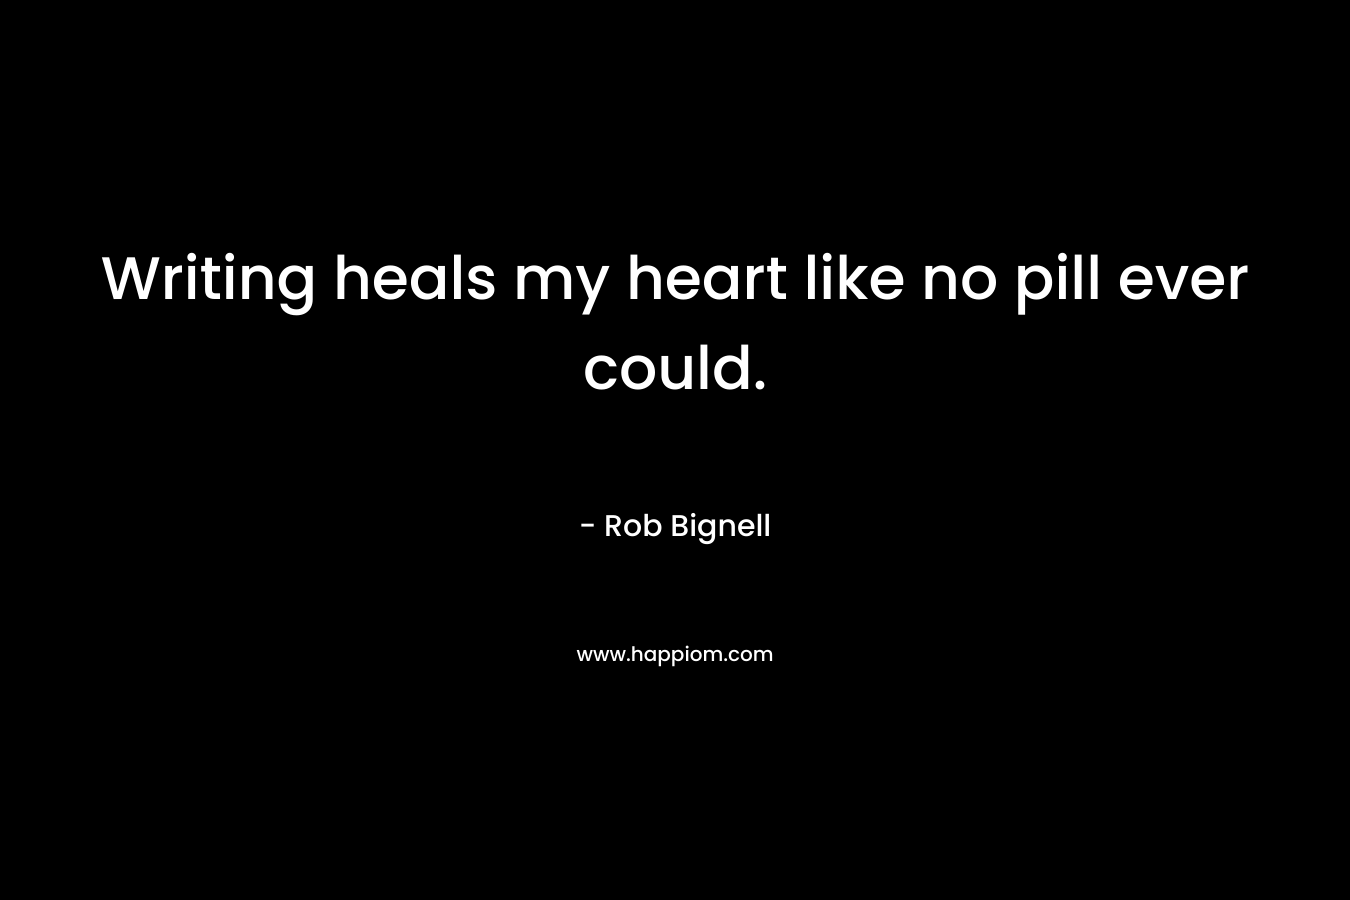 Writing heals my heart like no pill ever could.